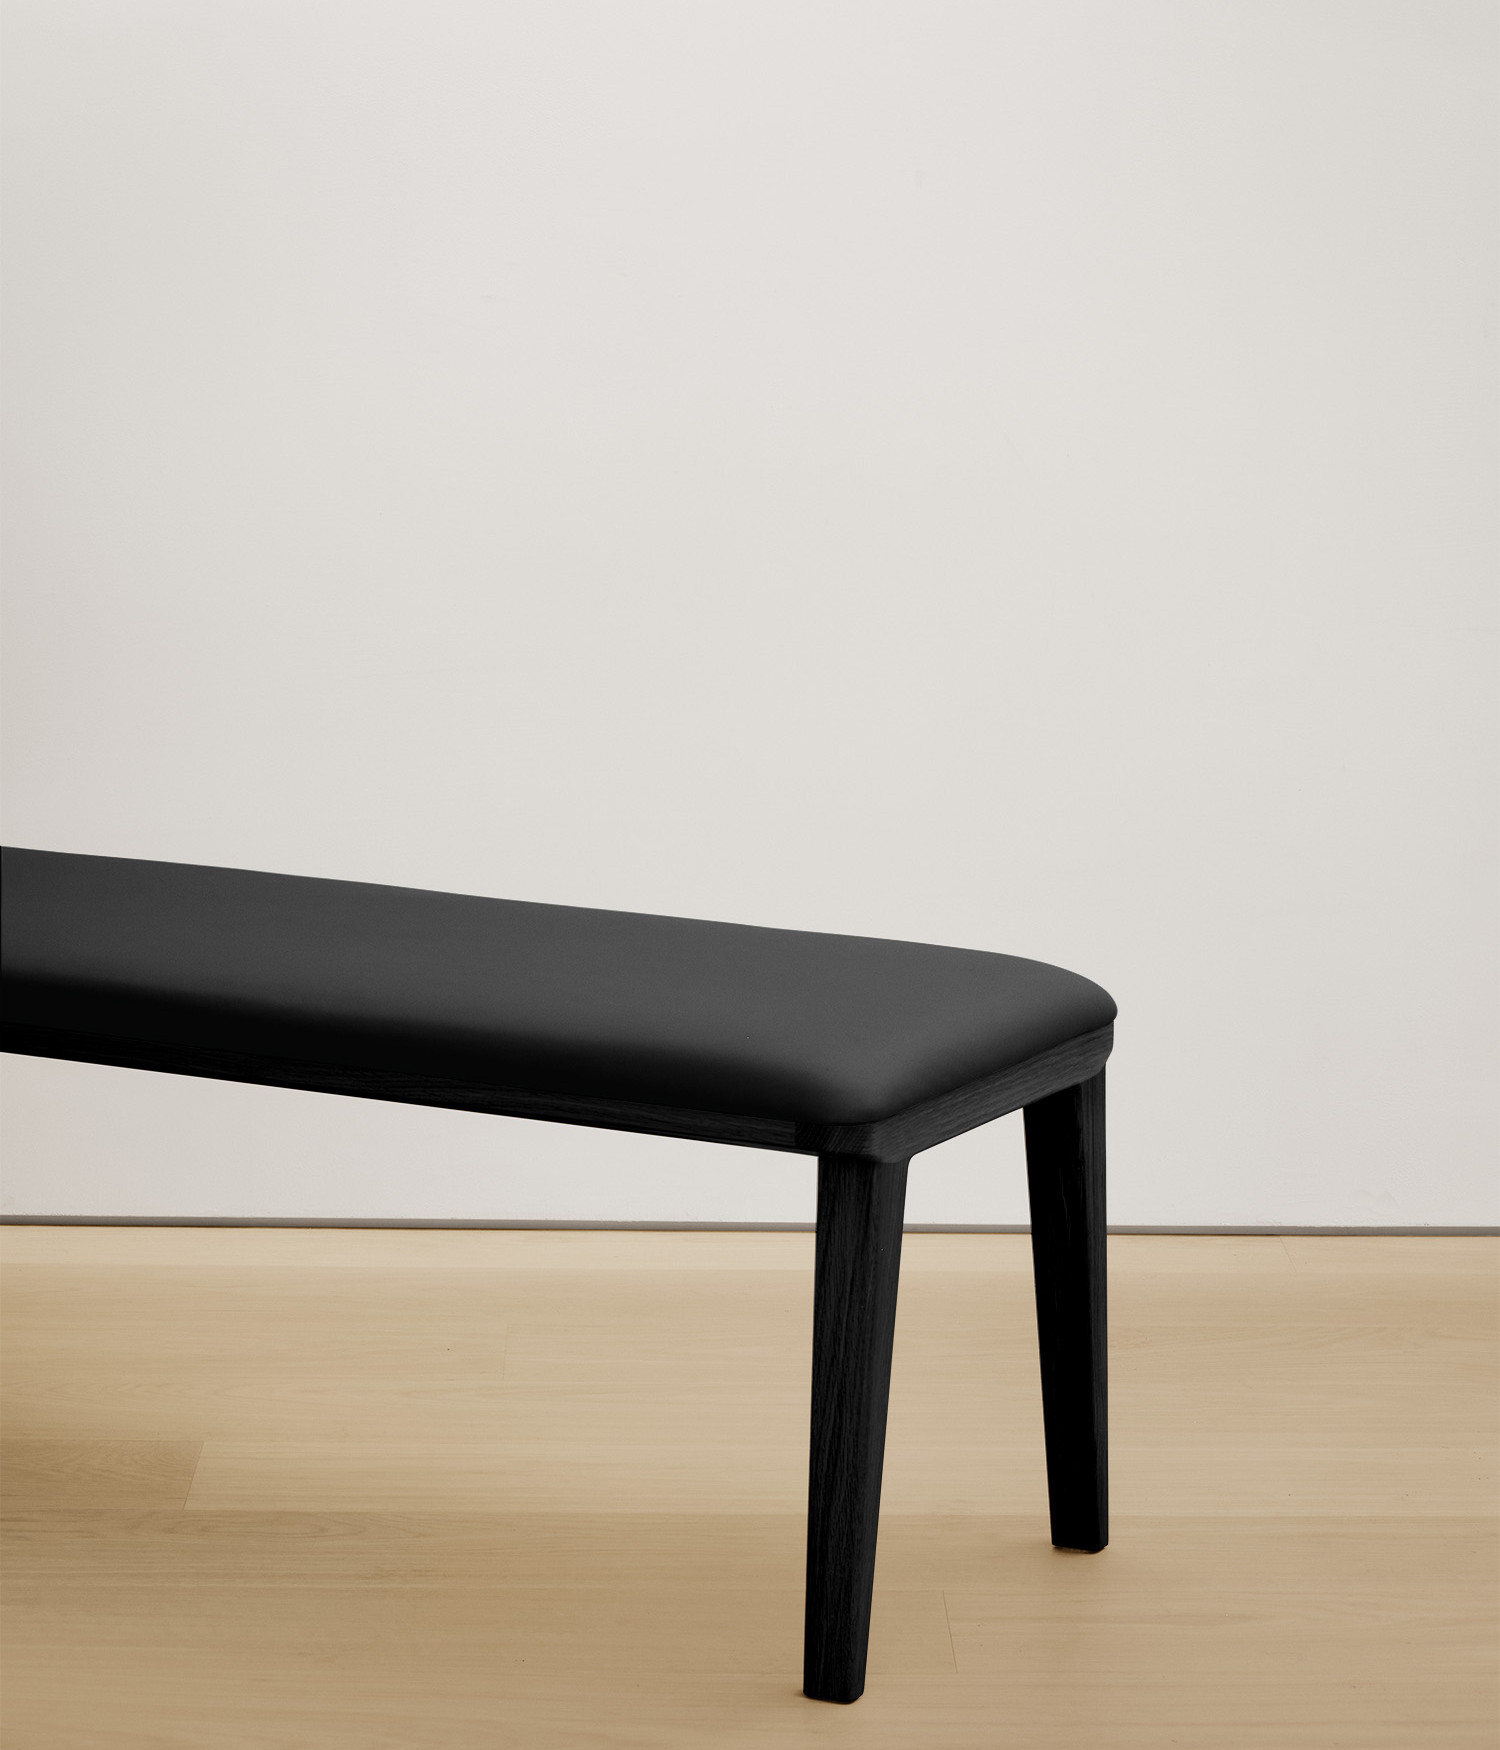  black-stained-oak bench with black color upholstered seat